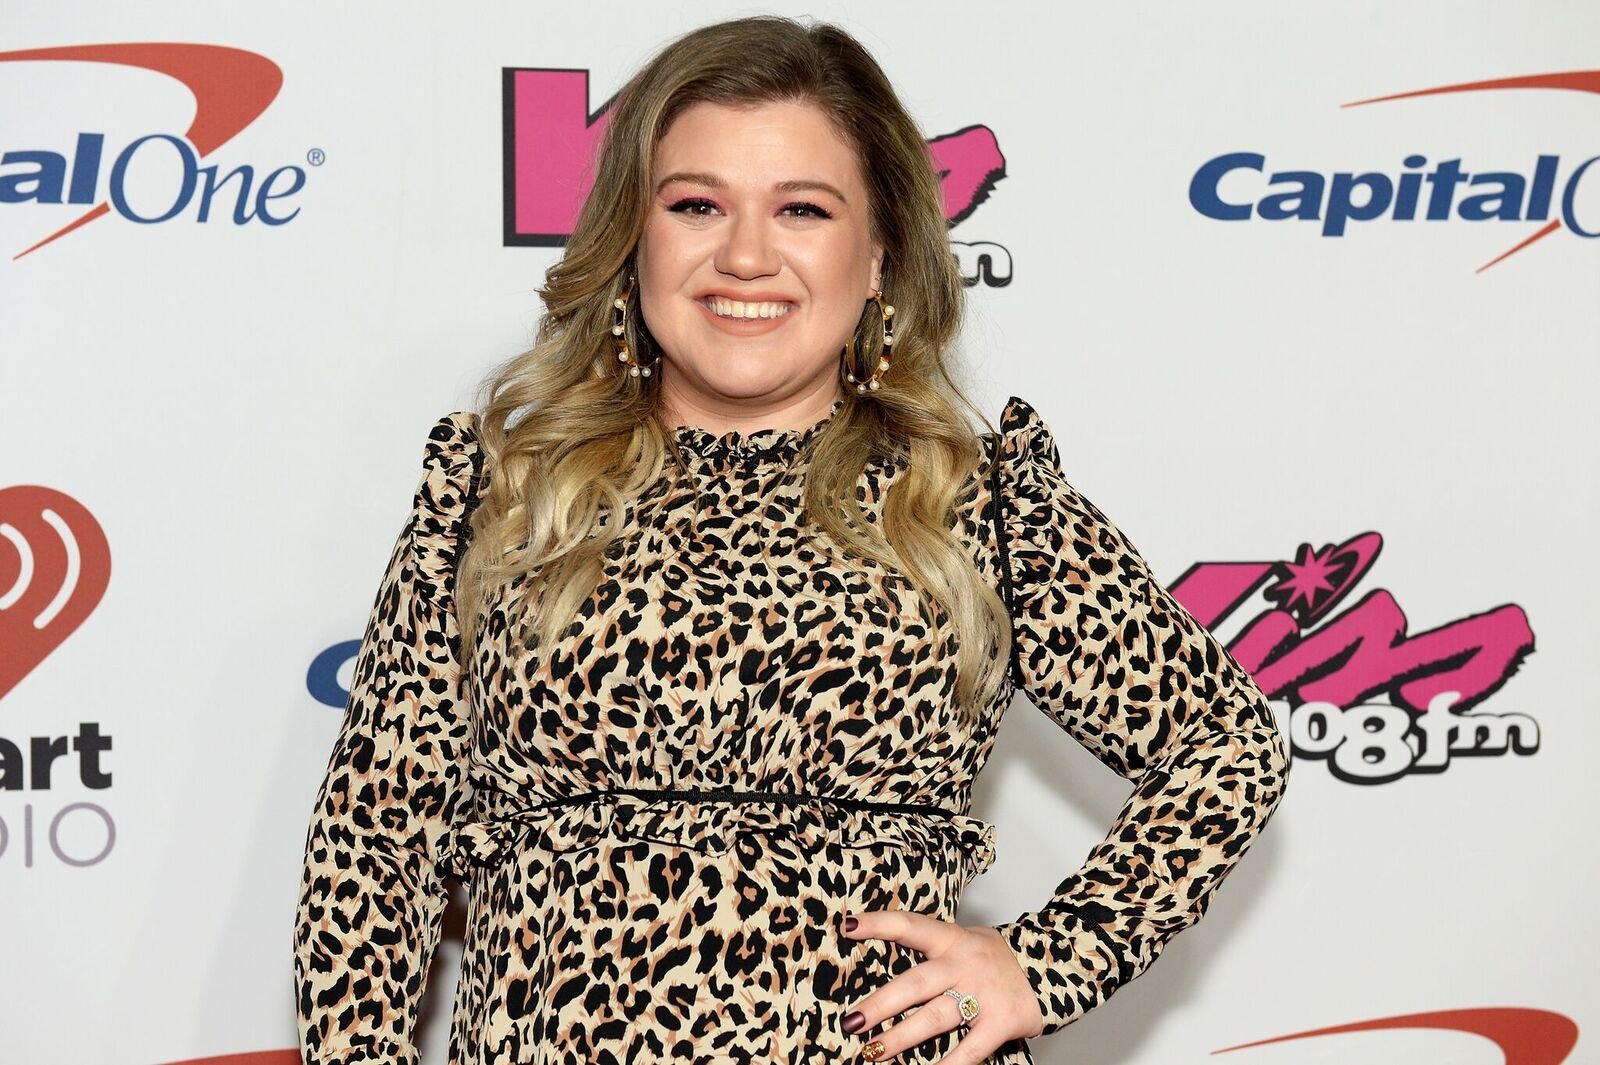 Kelly Clarkson attends KISS 108's Jingle Ball 2017 presented by Capital One at TD Garden on December 10, 2017 | Photo: Getty Images